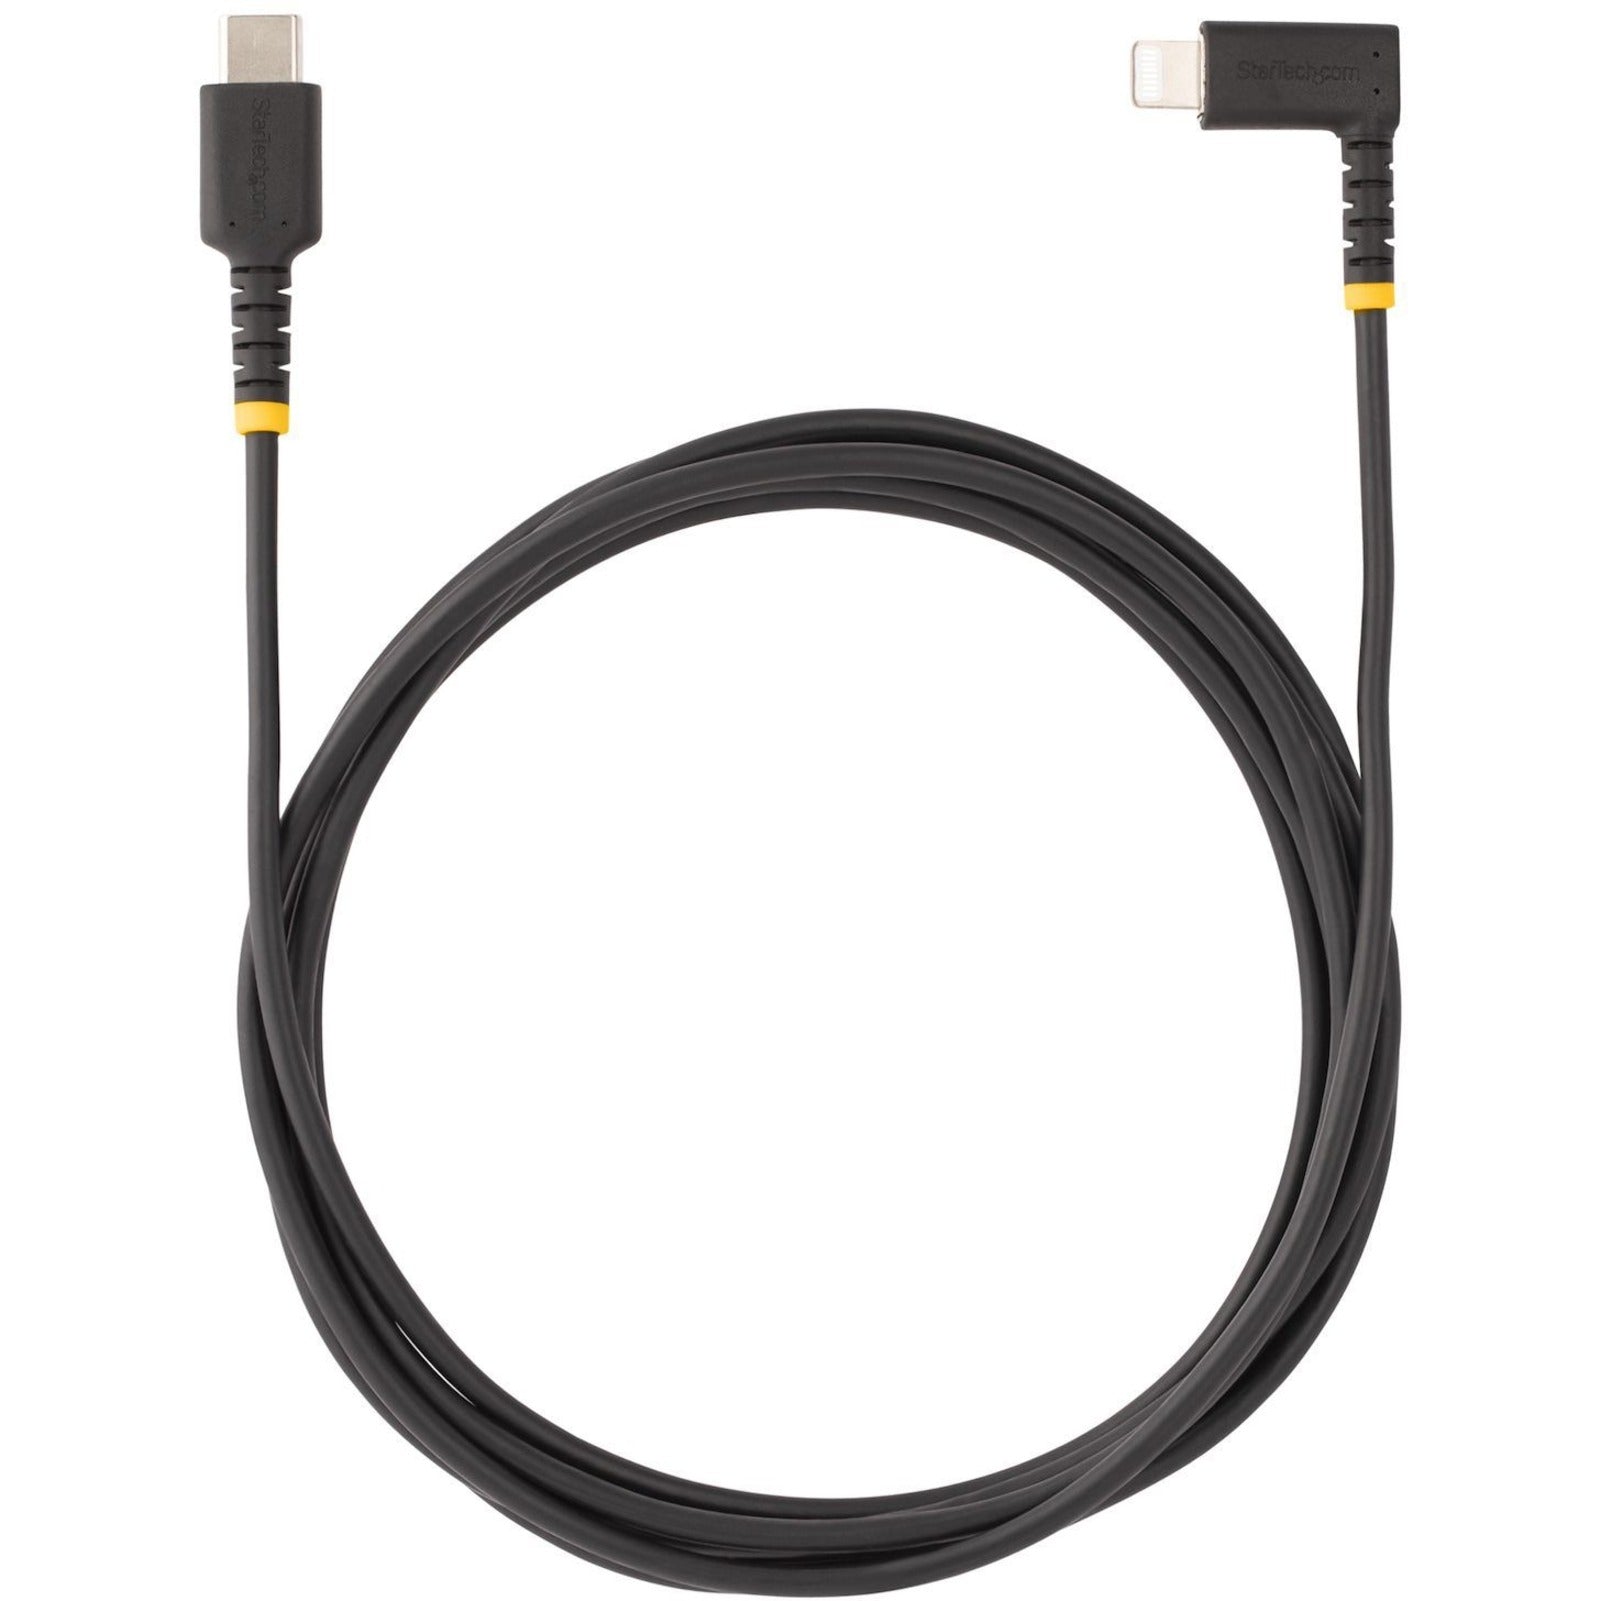 StarTech.com RUSB2CLTMM2MR USB-C to Right Angle Lightning Cable, 6FT, Fast Charging, Apple iPhone/iPad Compatible